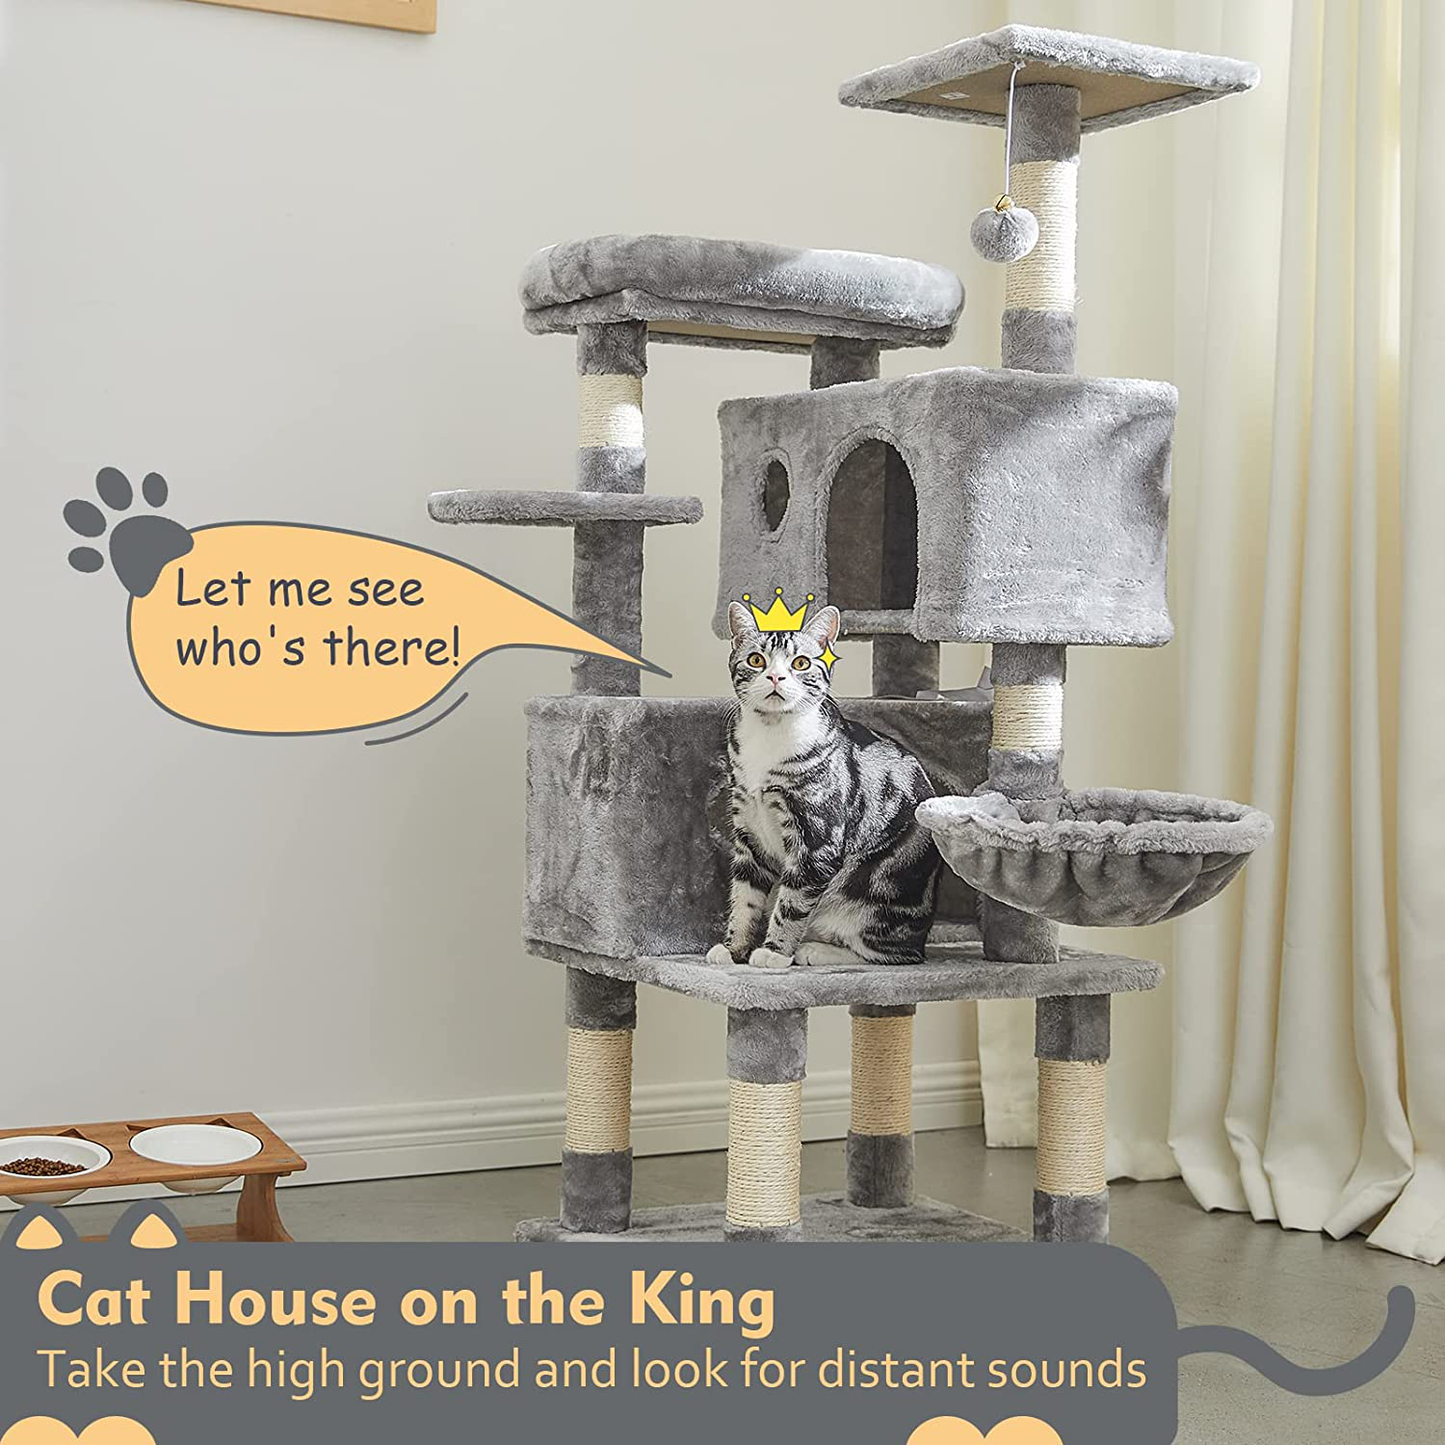 SUPERJARE Cat Tree Condo Furniture with Scratching Posts, Plush Cozy Perch and Dangling Balls, Multi-Level Kitten Tower